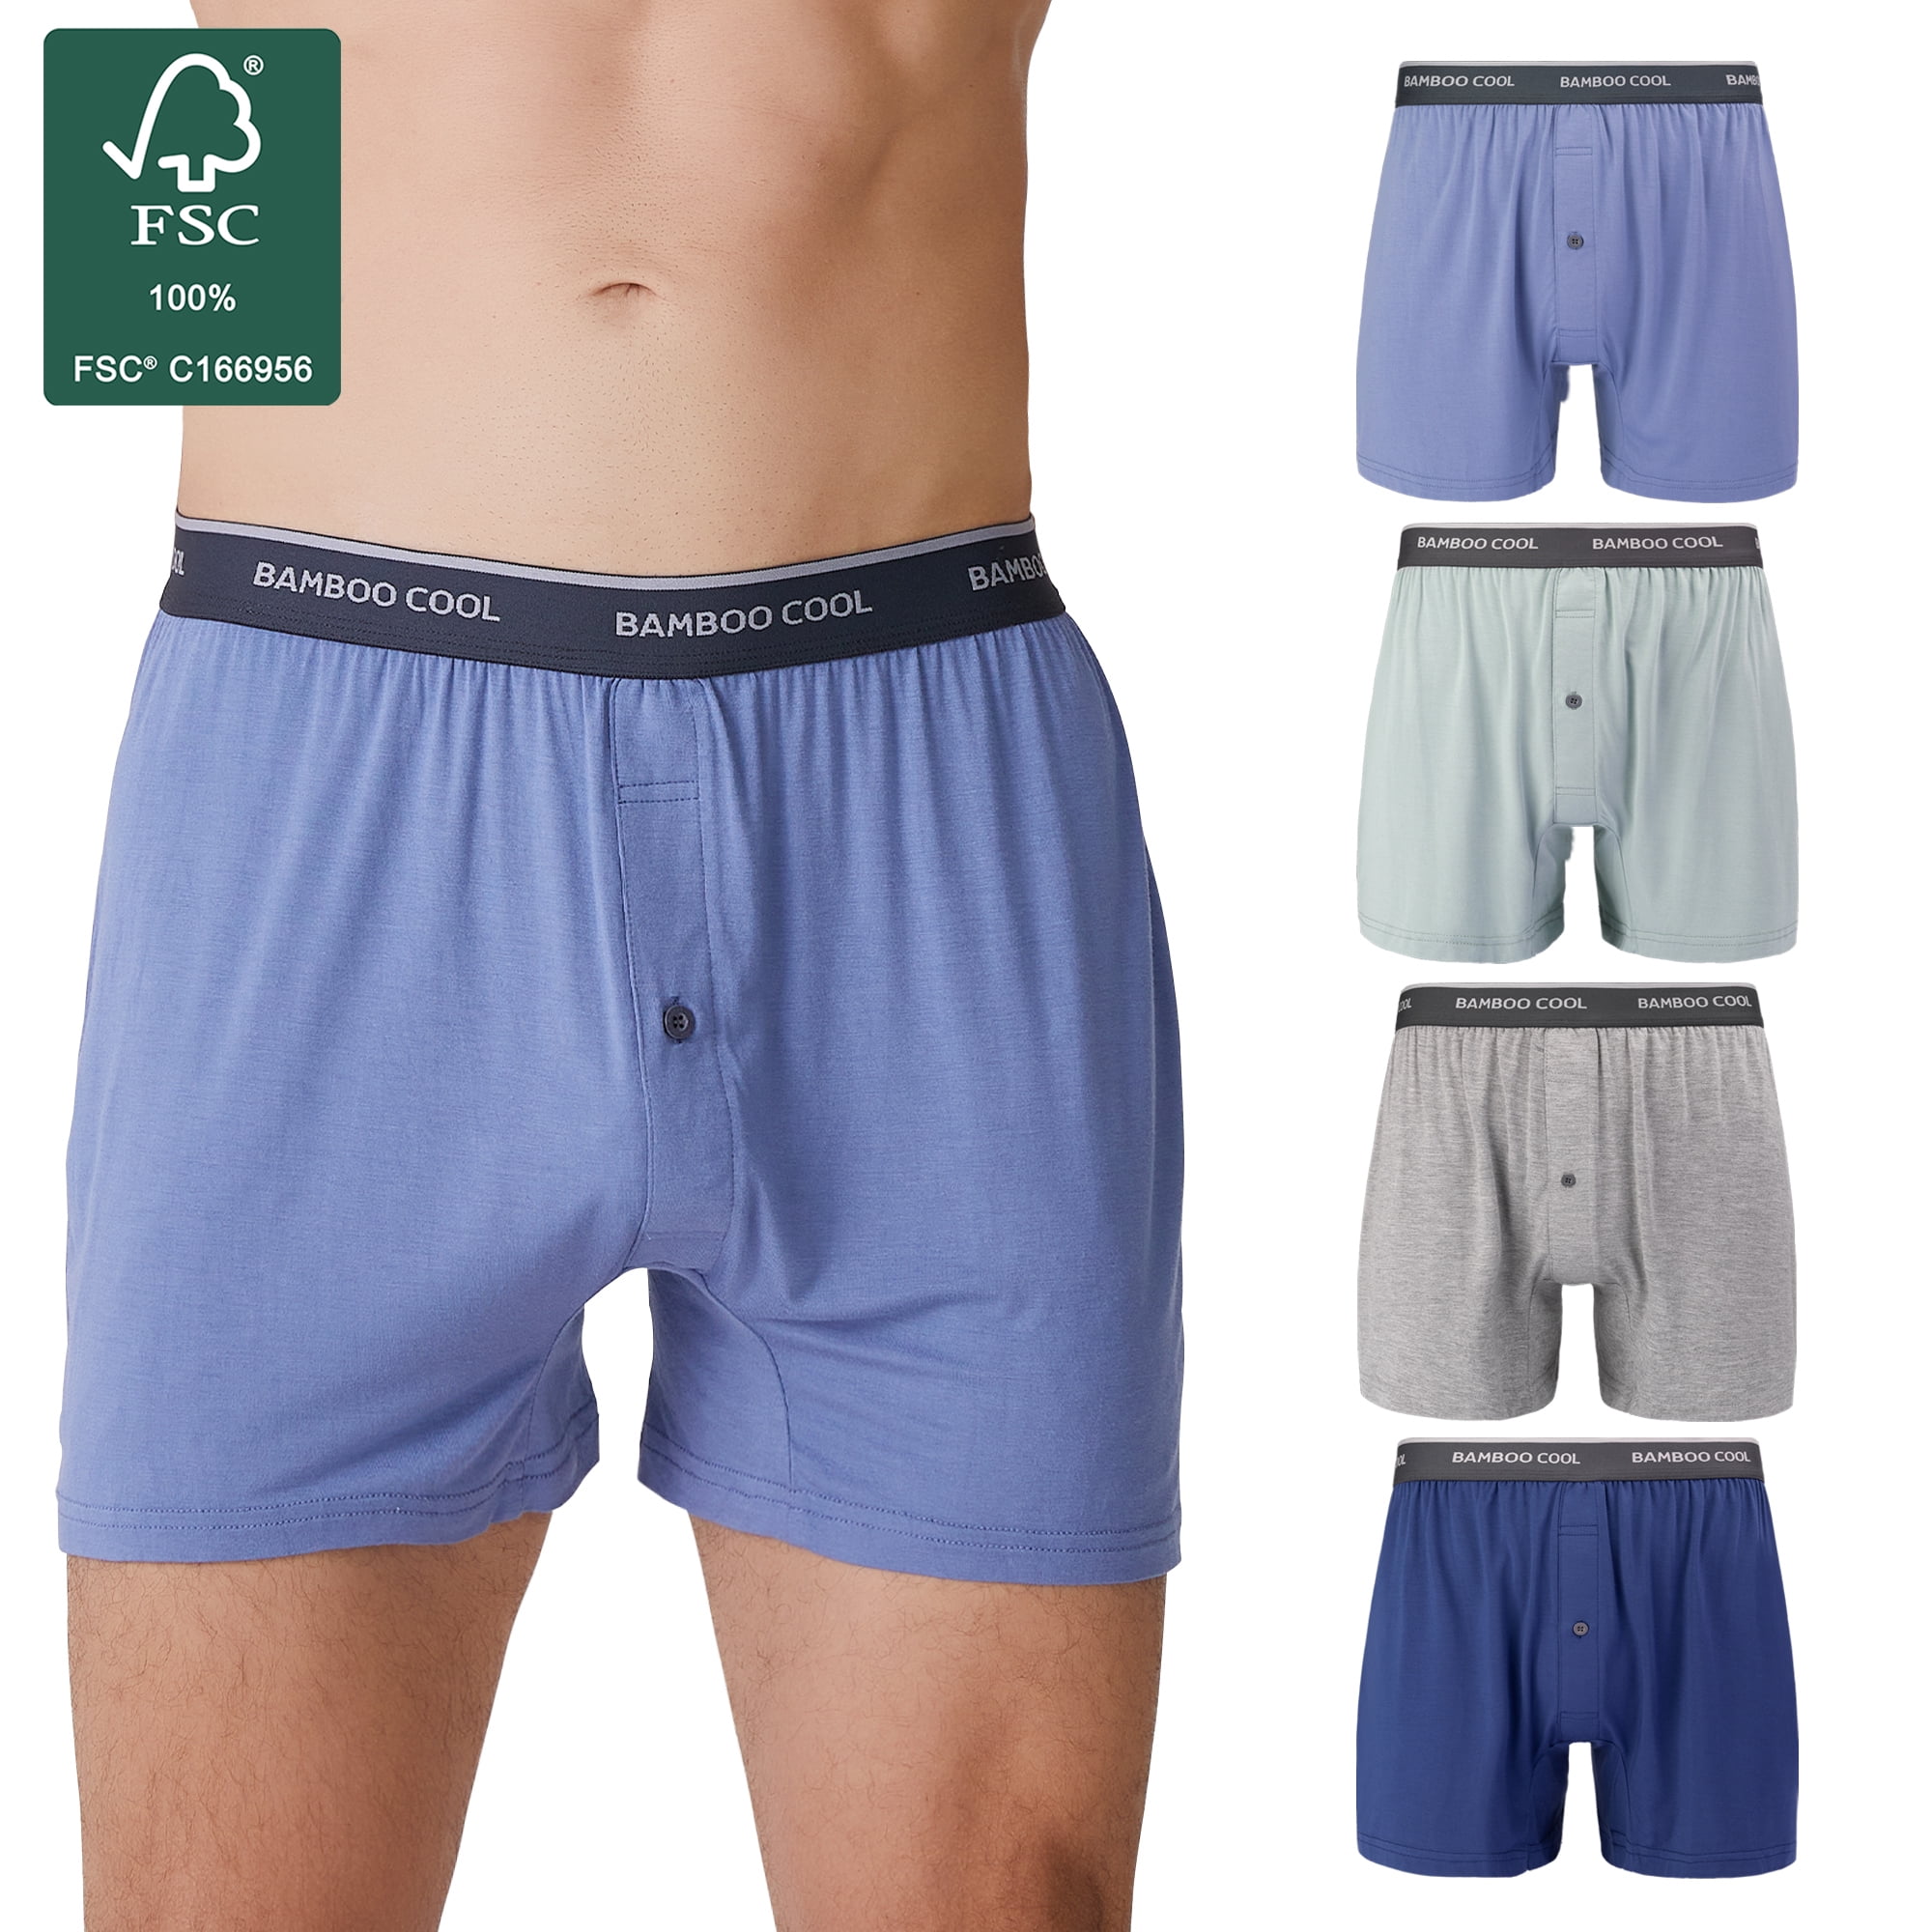 Men's Boxer Shorts Moisture-Wicking,Breathable Bamboo Viscose